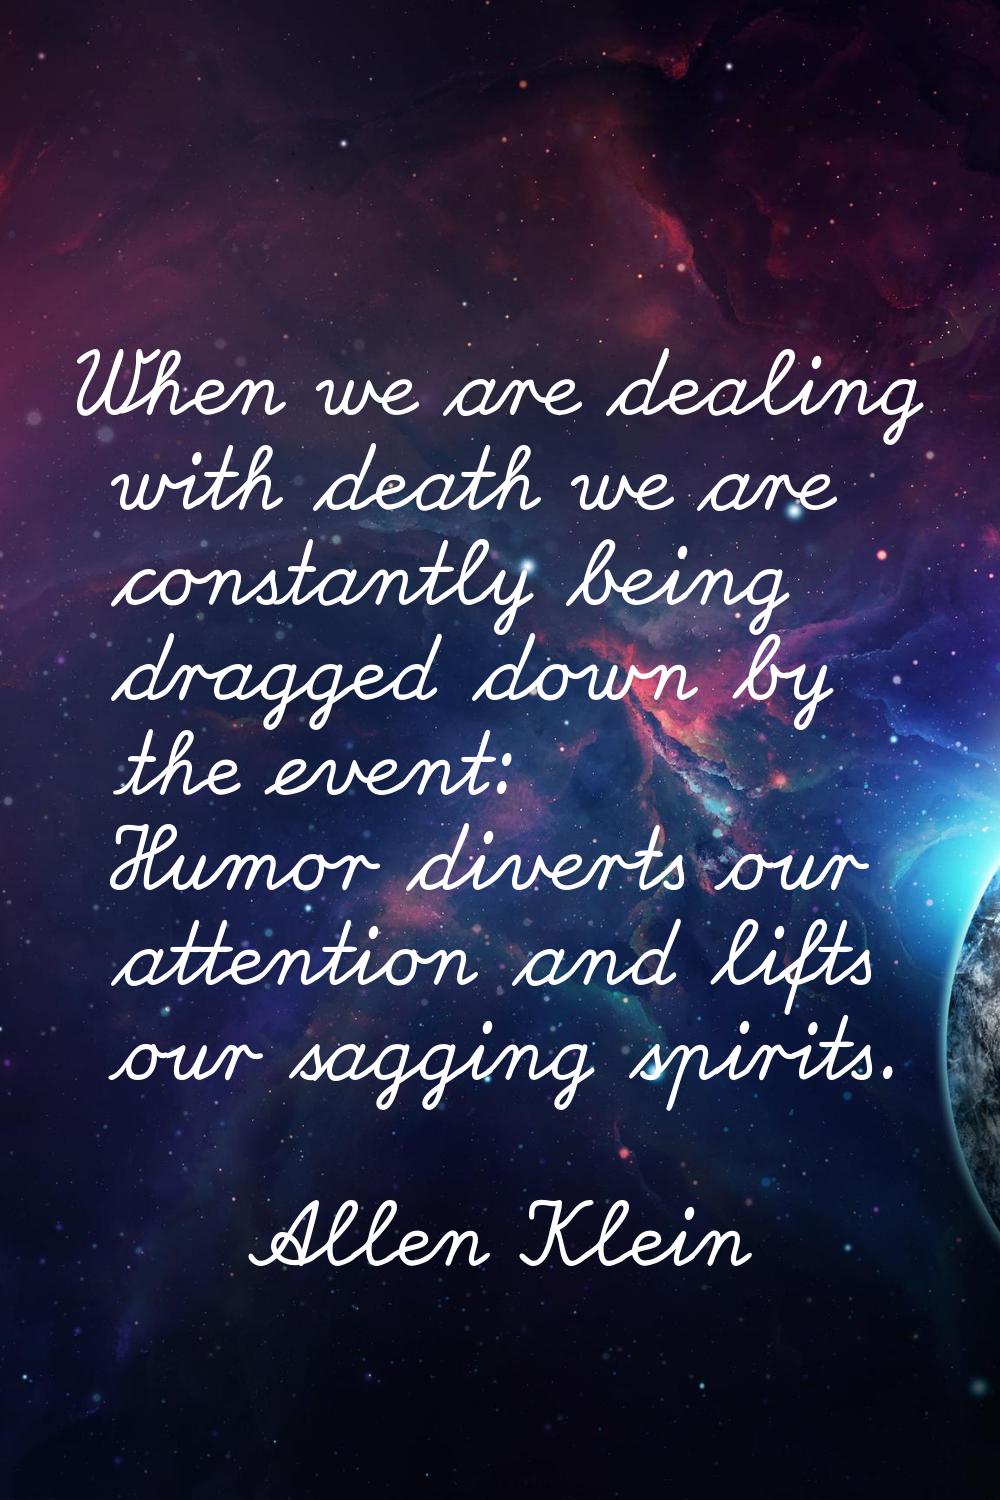 When we are dealing with death we are constantly being dragged down by the event: Humor diverts our